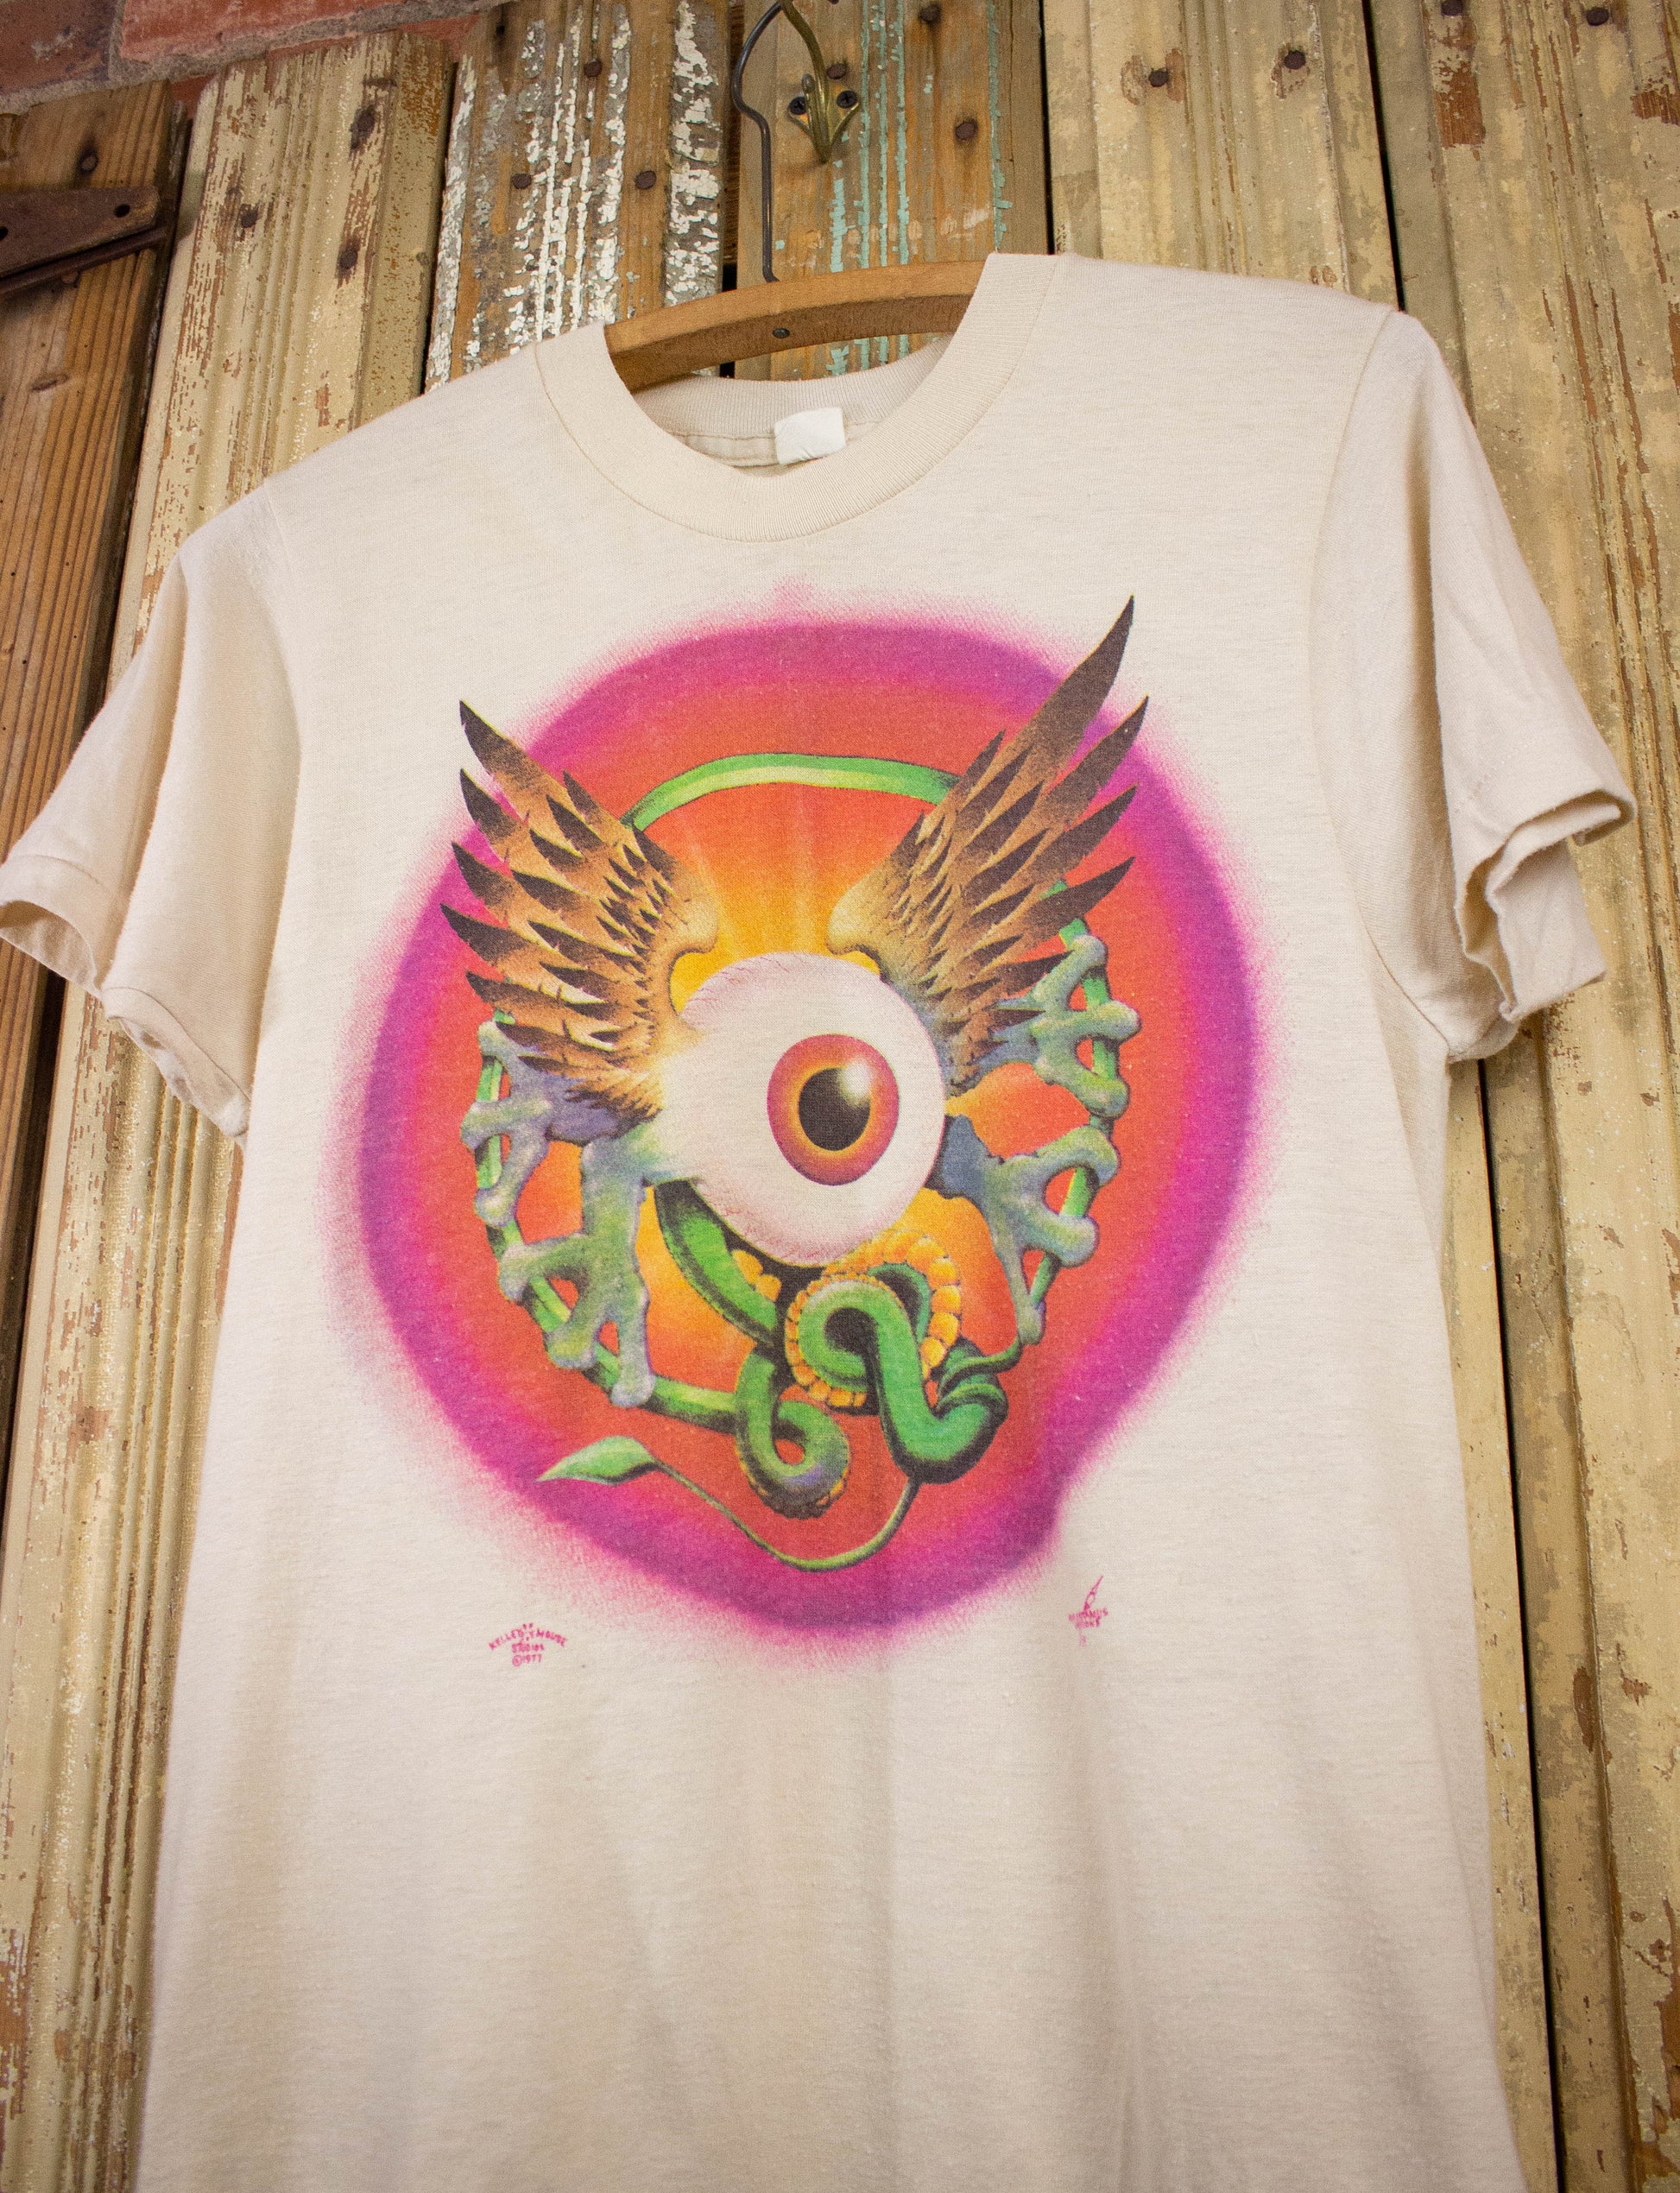 Vintage Kelly Mouse Studios Psychedelic Flying Eyeball Graphic T Shirt 1977 Cream Small